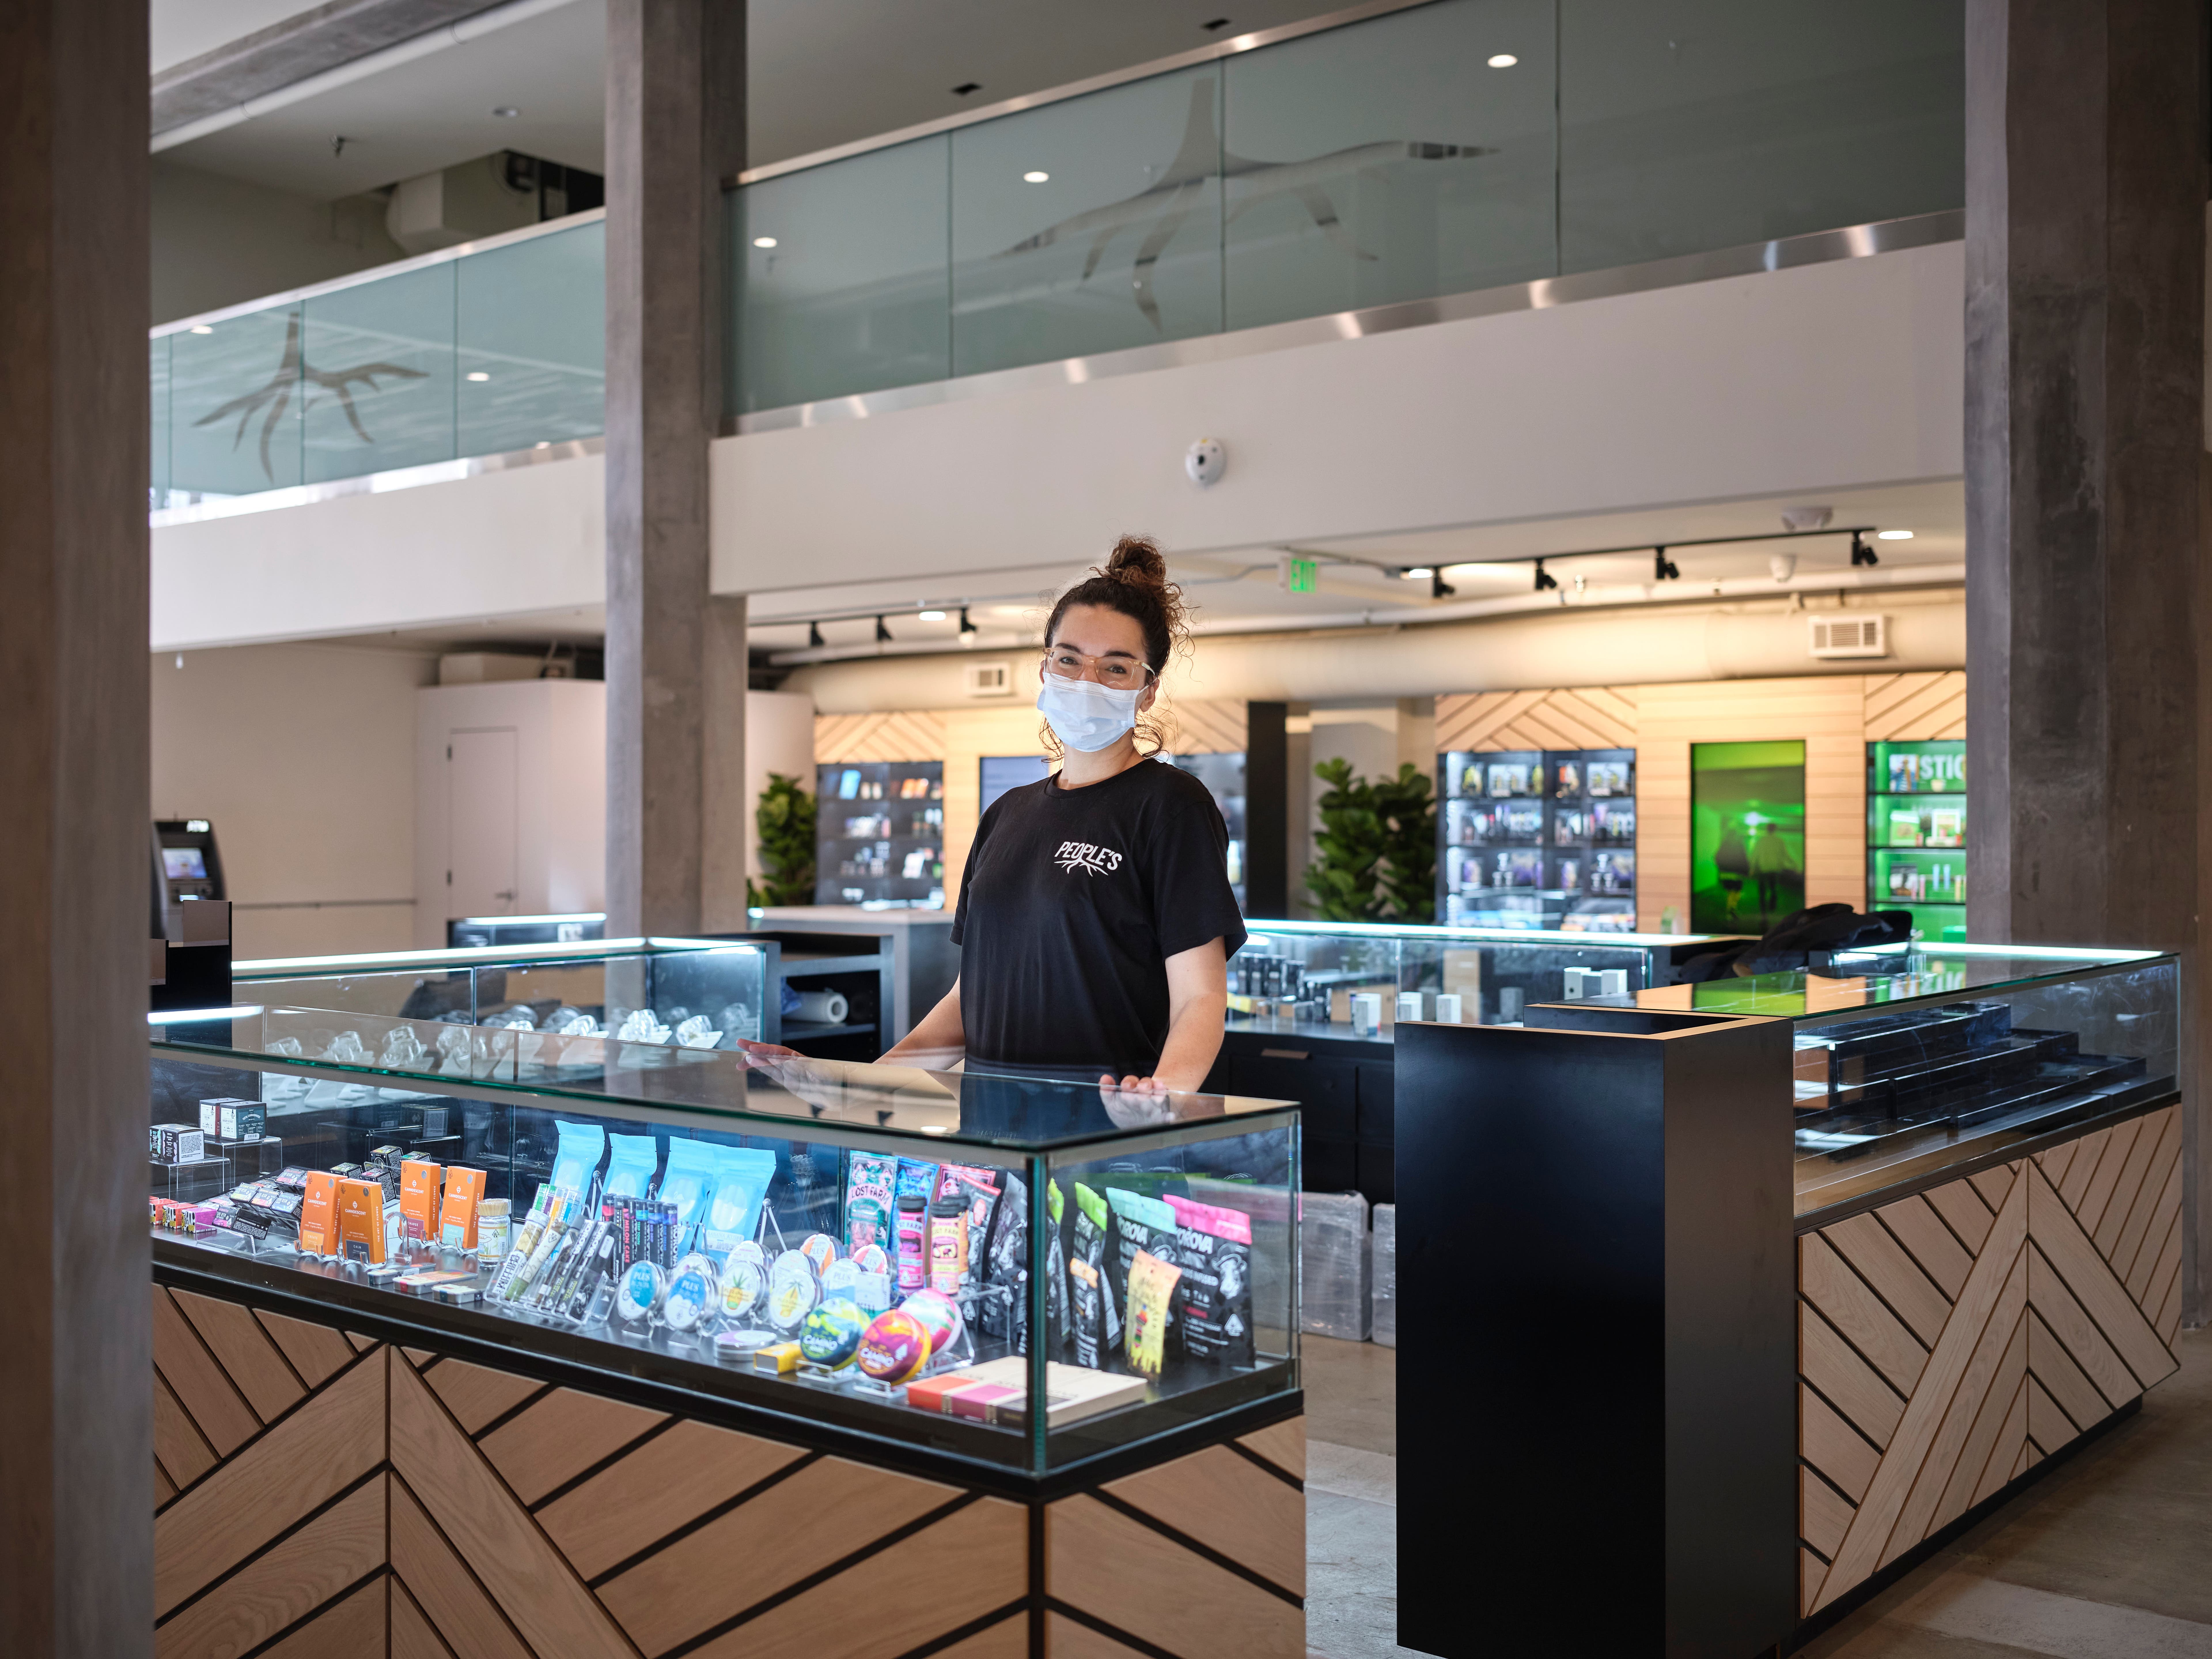 EXCLUSIVE: Unrivaled Brands Announces Grand Opening Of People's Downtown LA Cannabis Dispensary